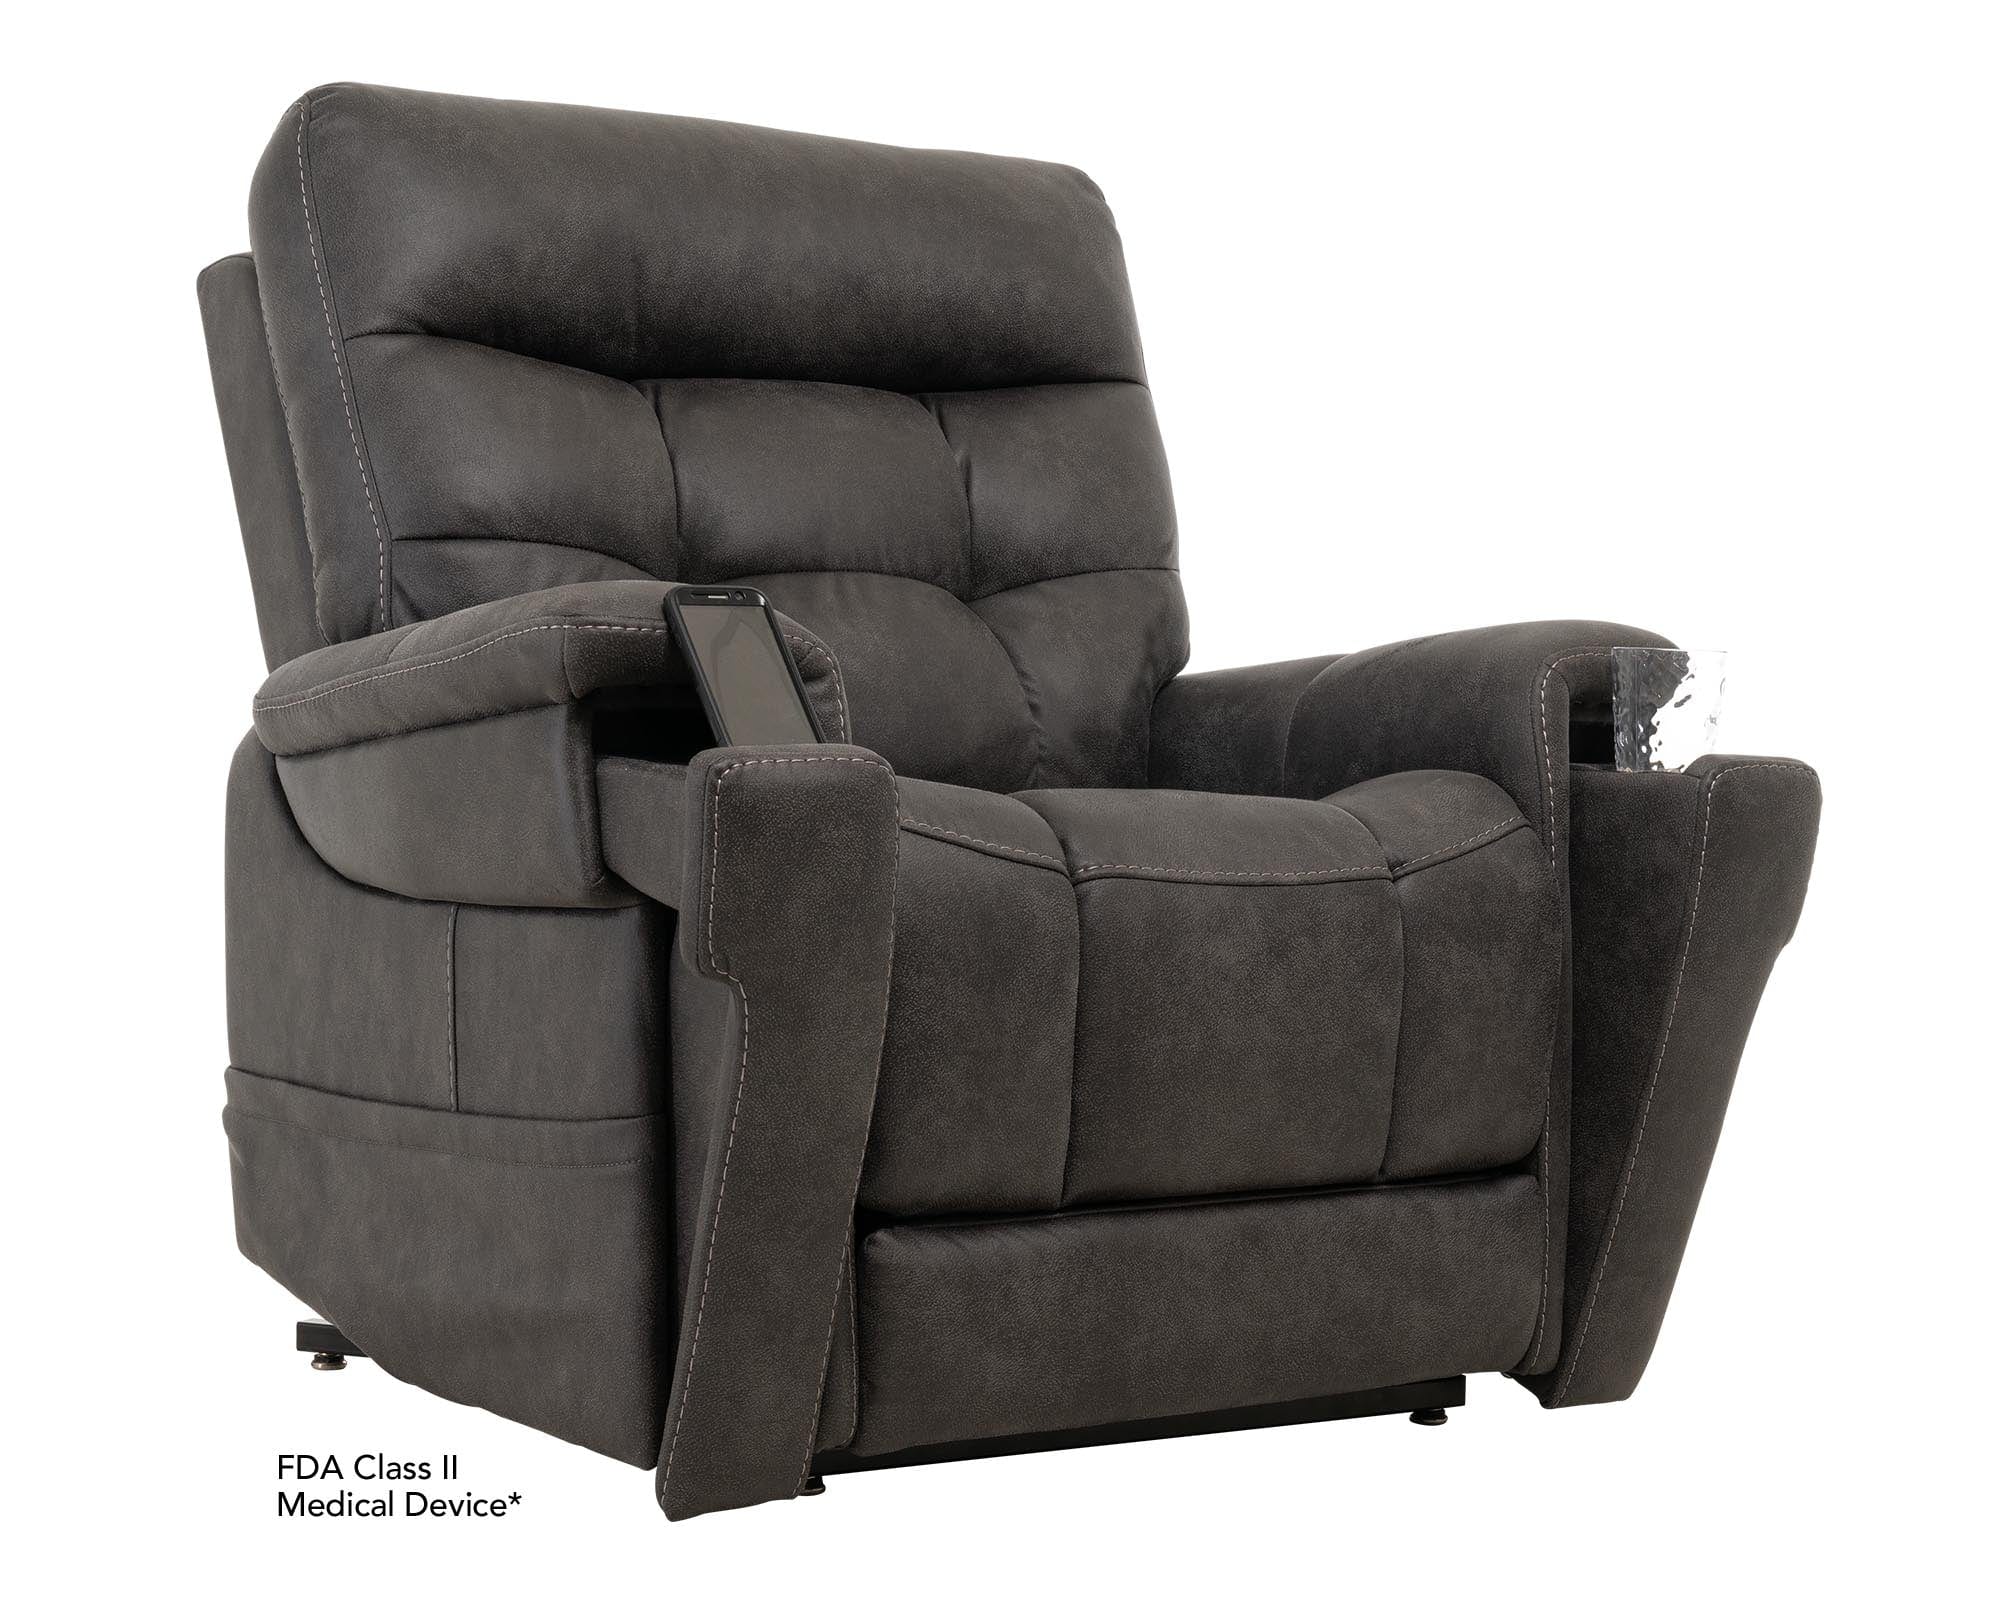 PRIDE Infinite Position Lift Chair Canyon Steel / Small (4' - 5' 3") Pride Vivalift! Radiance Lift Recliner